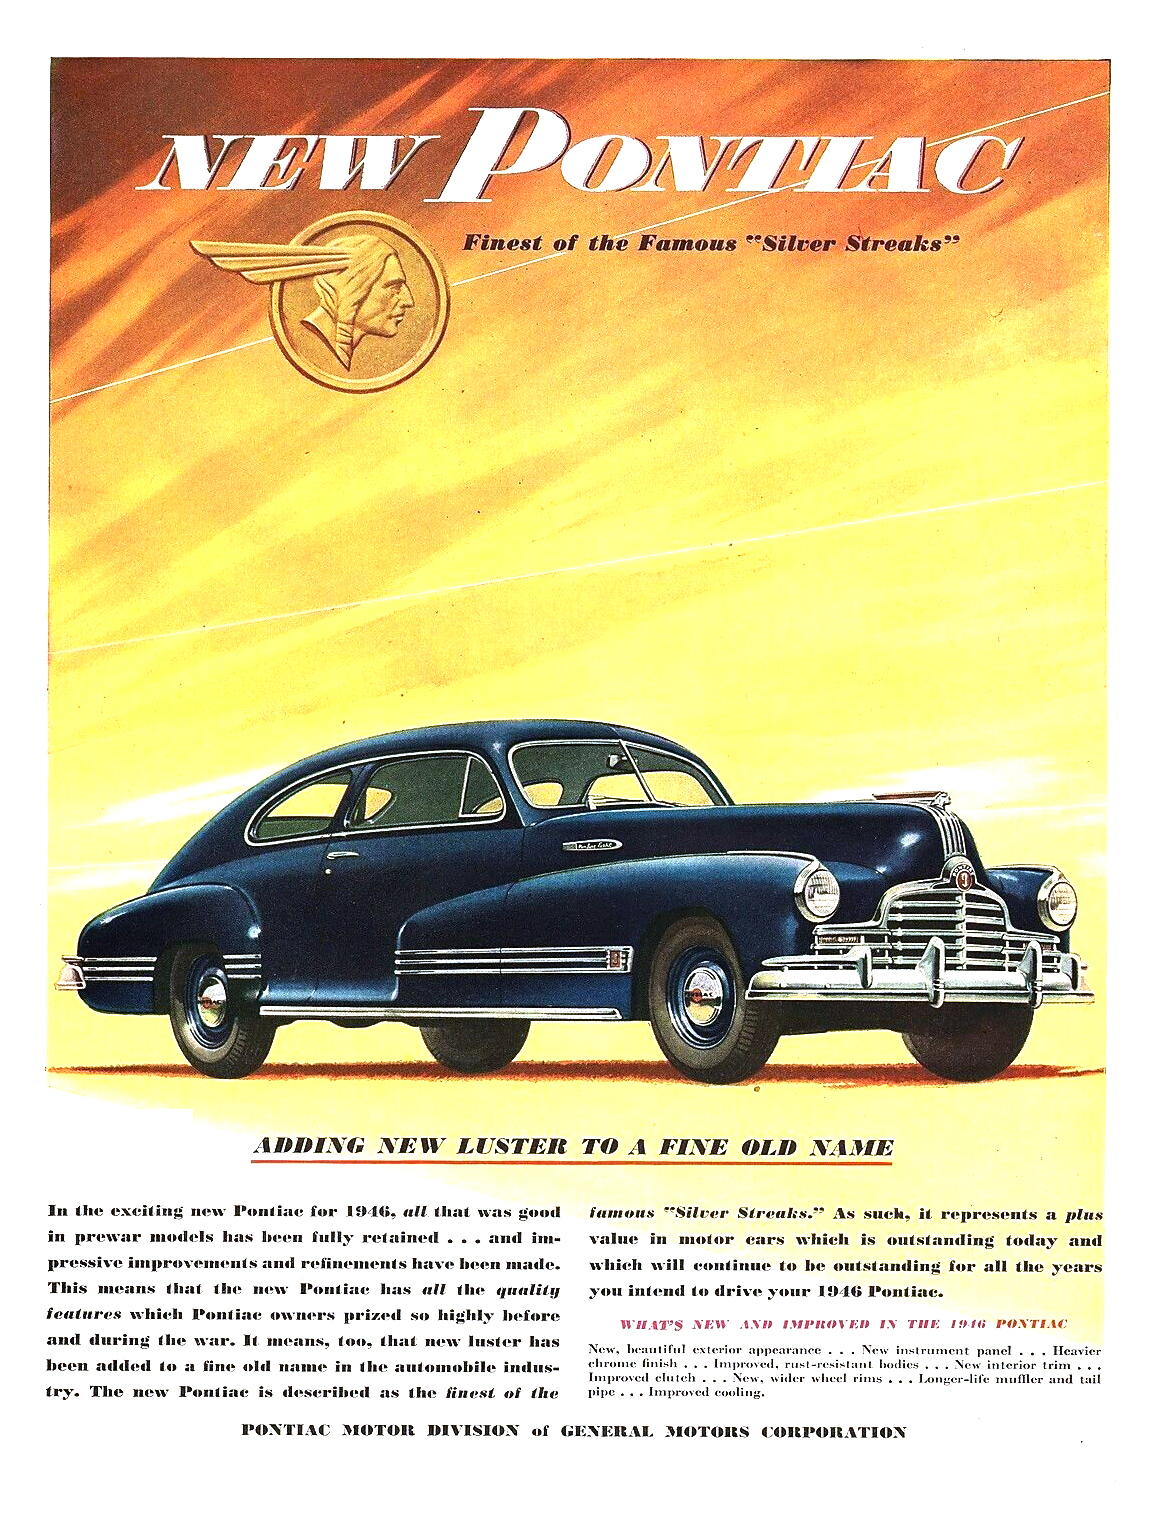 Pontiac Streamliner Sedan-Coupe Ad (December, 1945 - January, 1946): Adding New Luster to a Fine Old Name